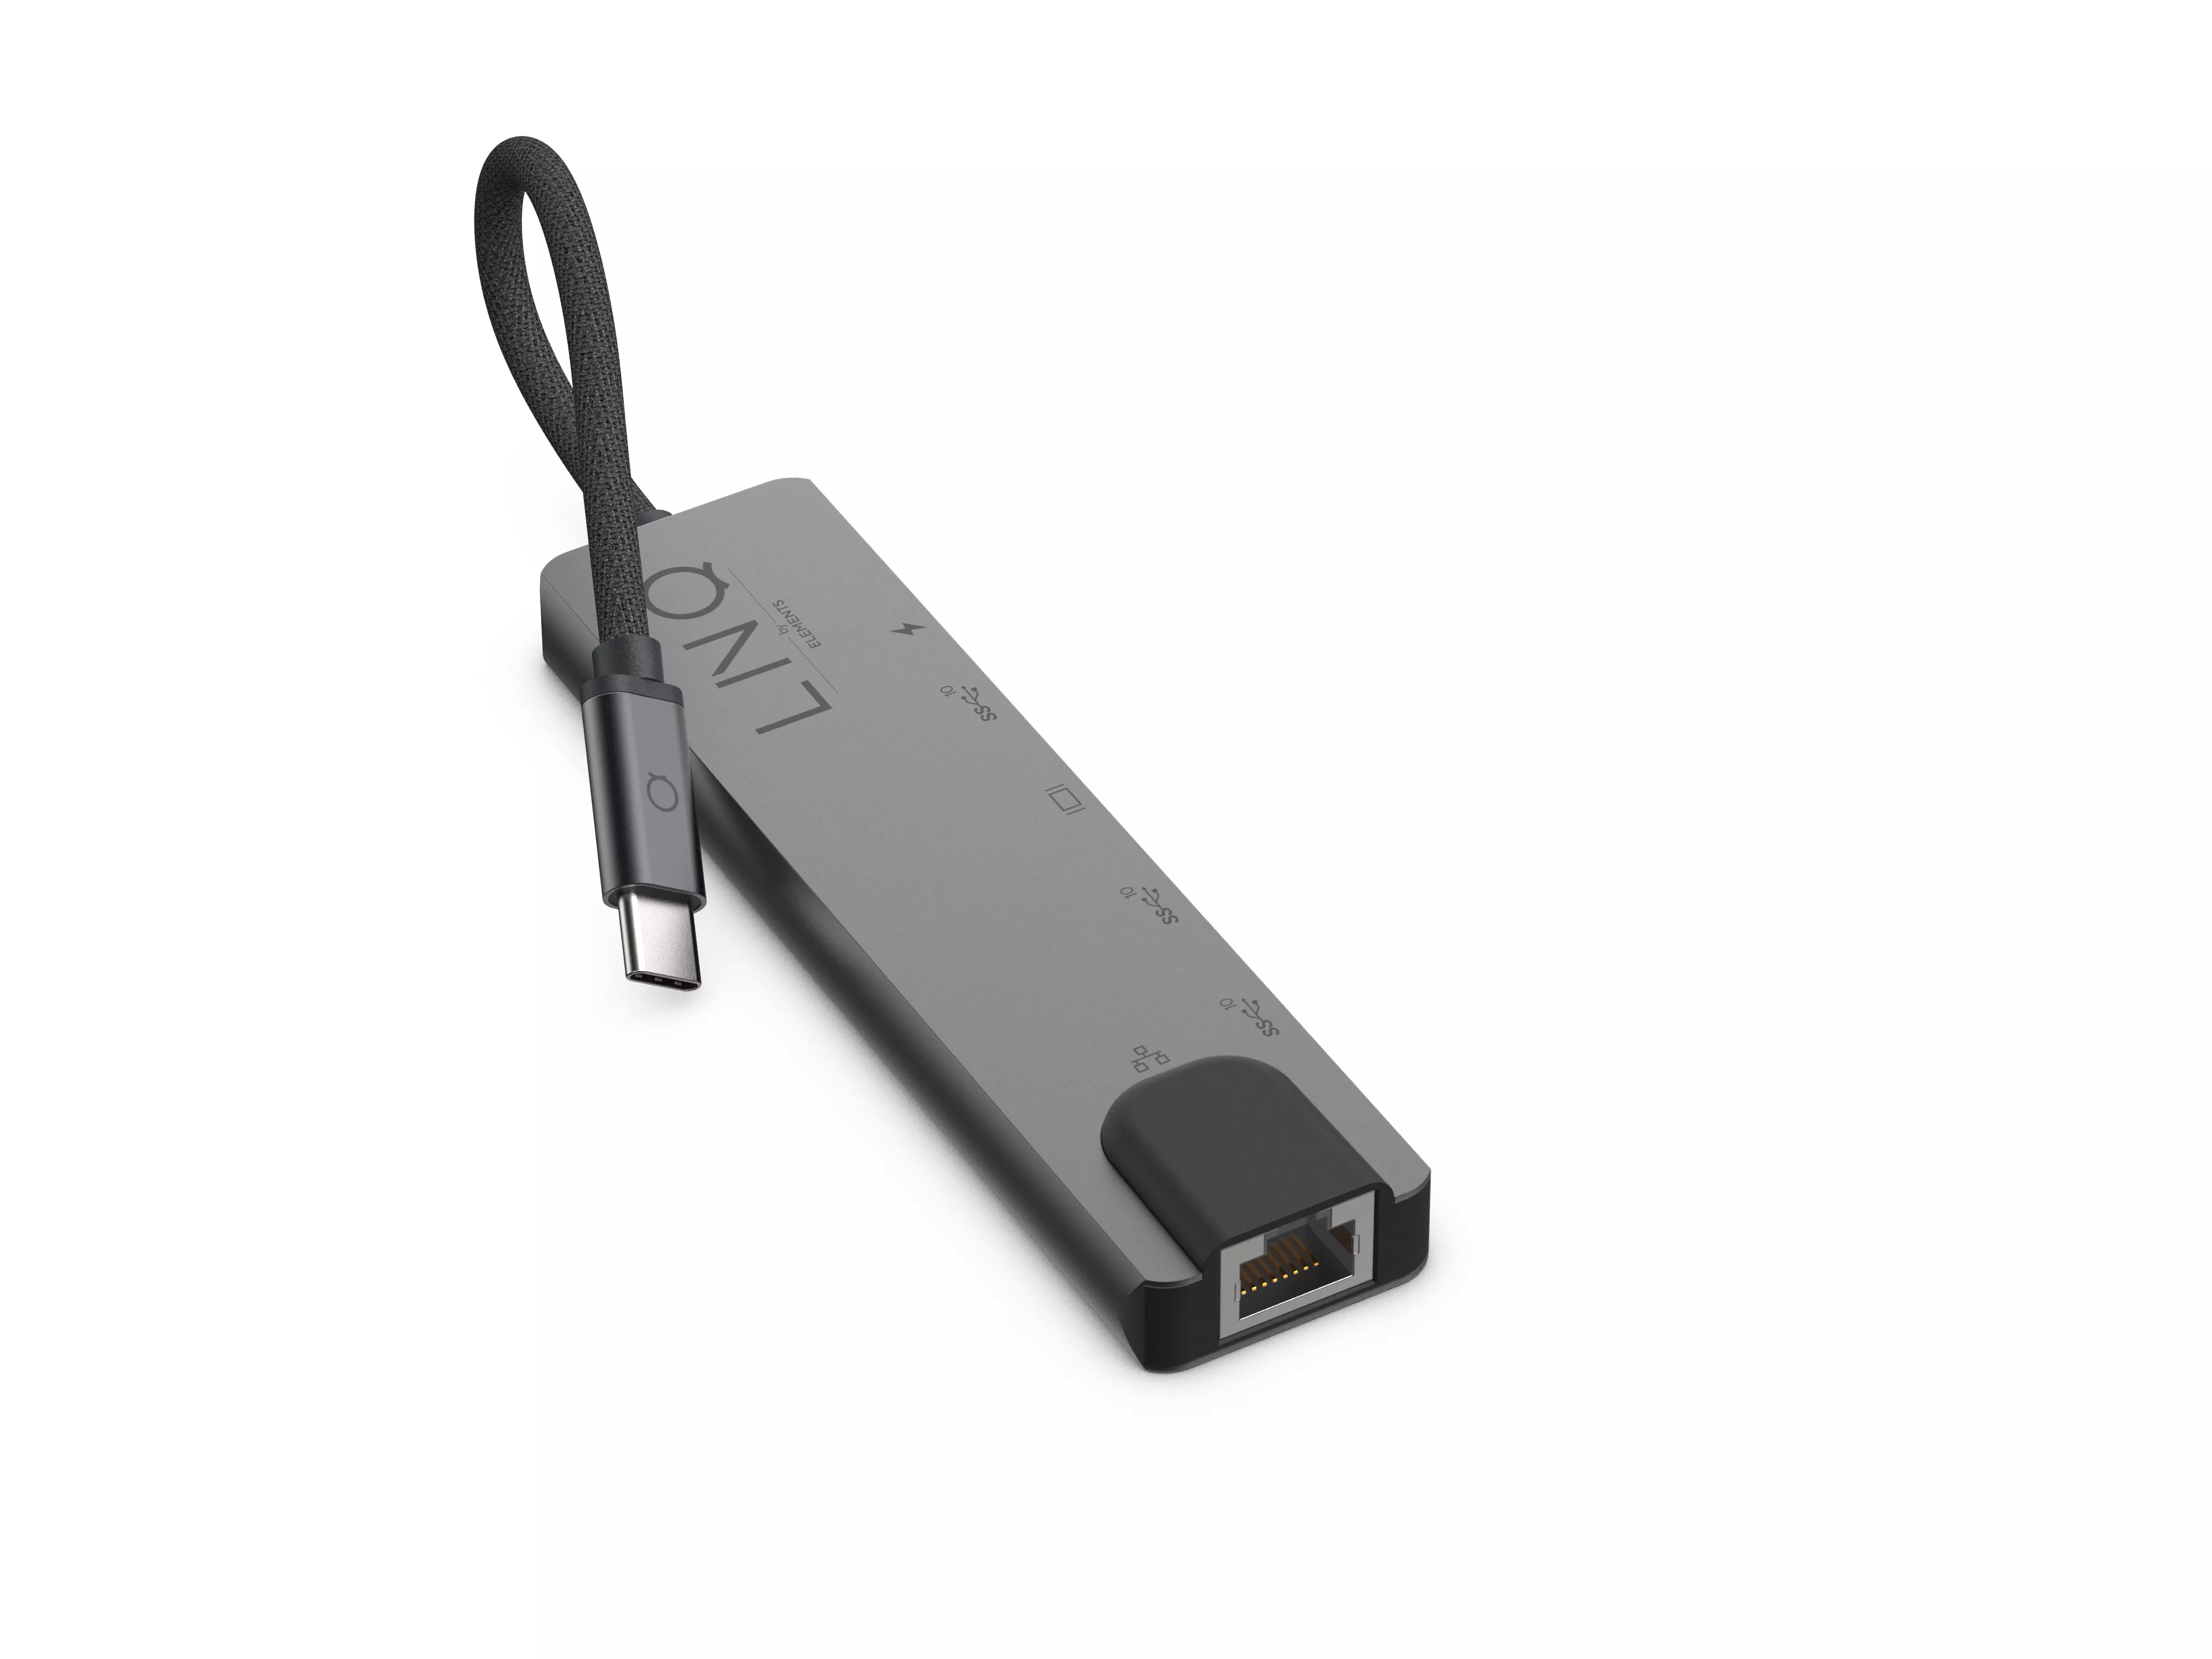 Achat LINQ byELEMENTS 6in1 Pro USB-C 10Gbps Multiport Hub sur hello RSE - visuel 3